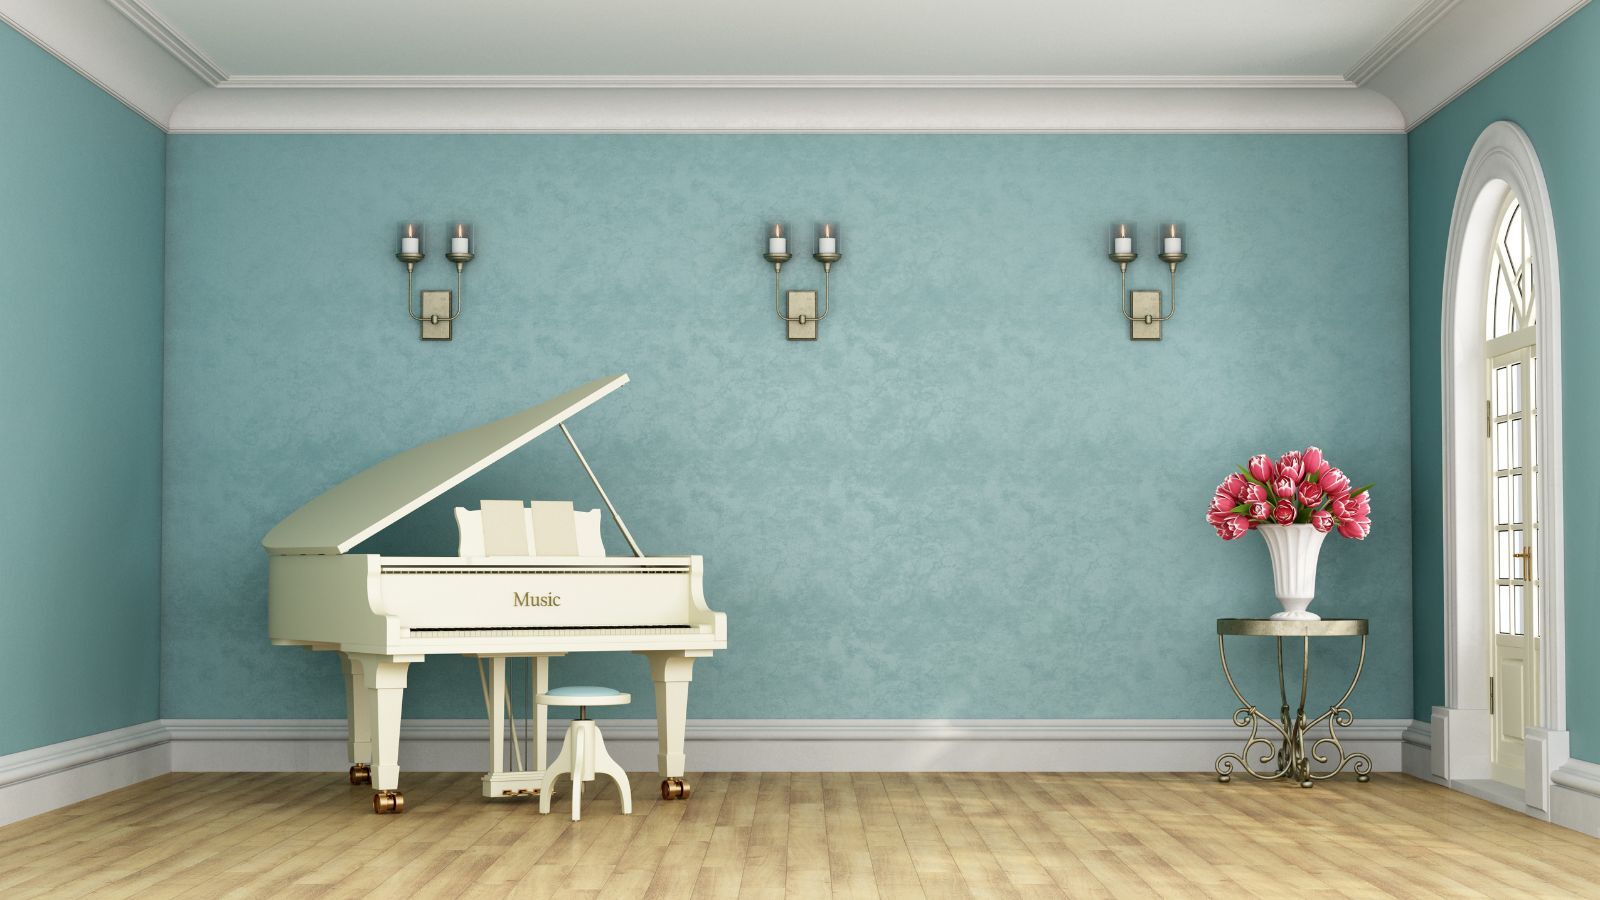 15 Best Music Room Ideas to Spark Your Creativity!